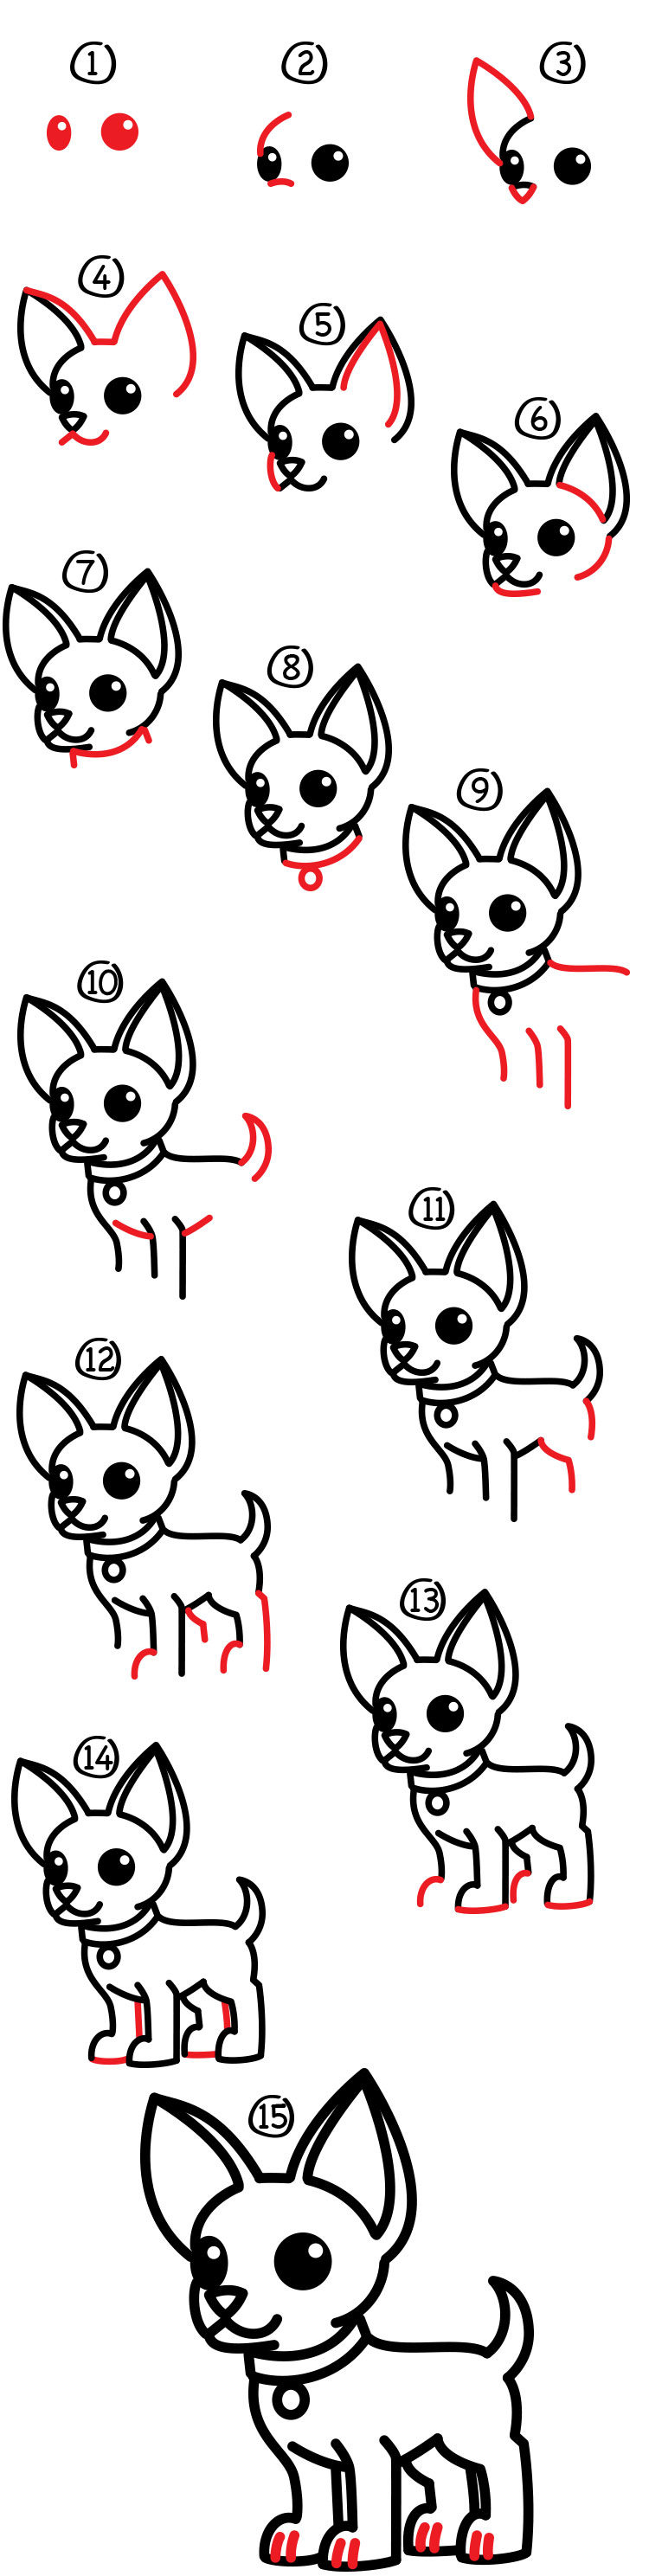 How To Draw A Chihuahua - Art For Kids Hub